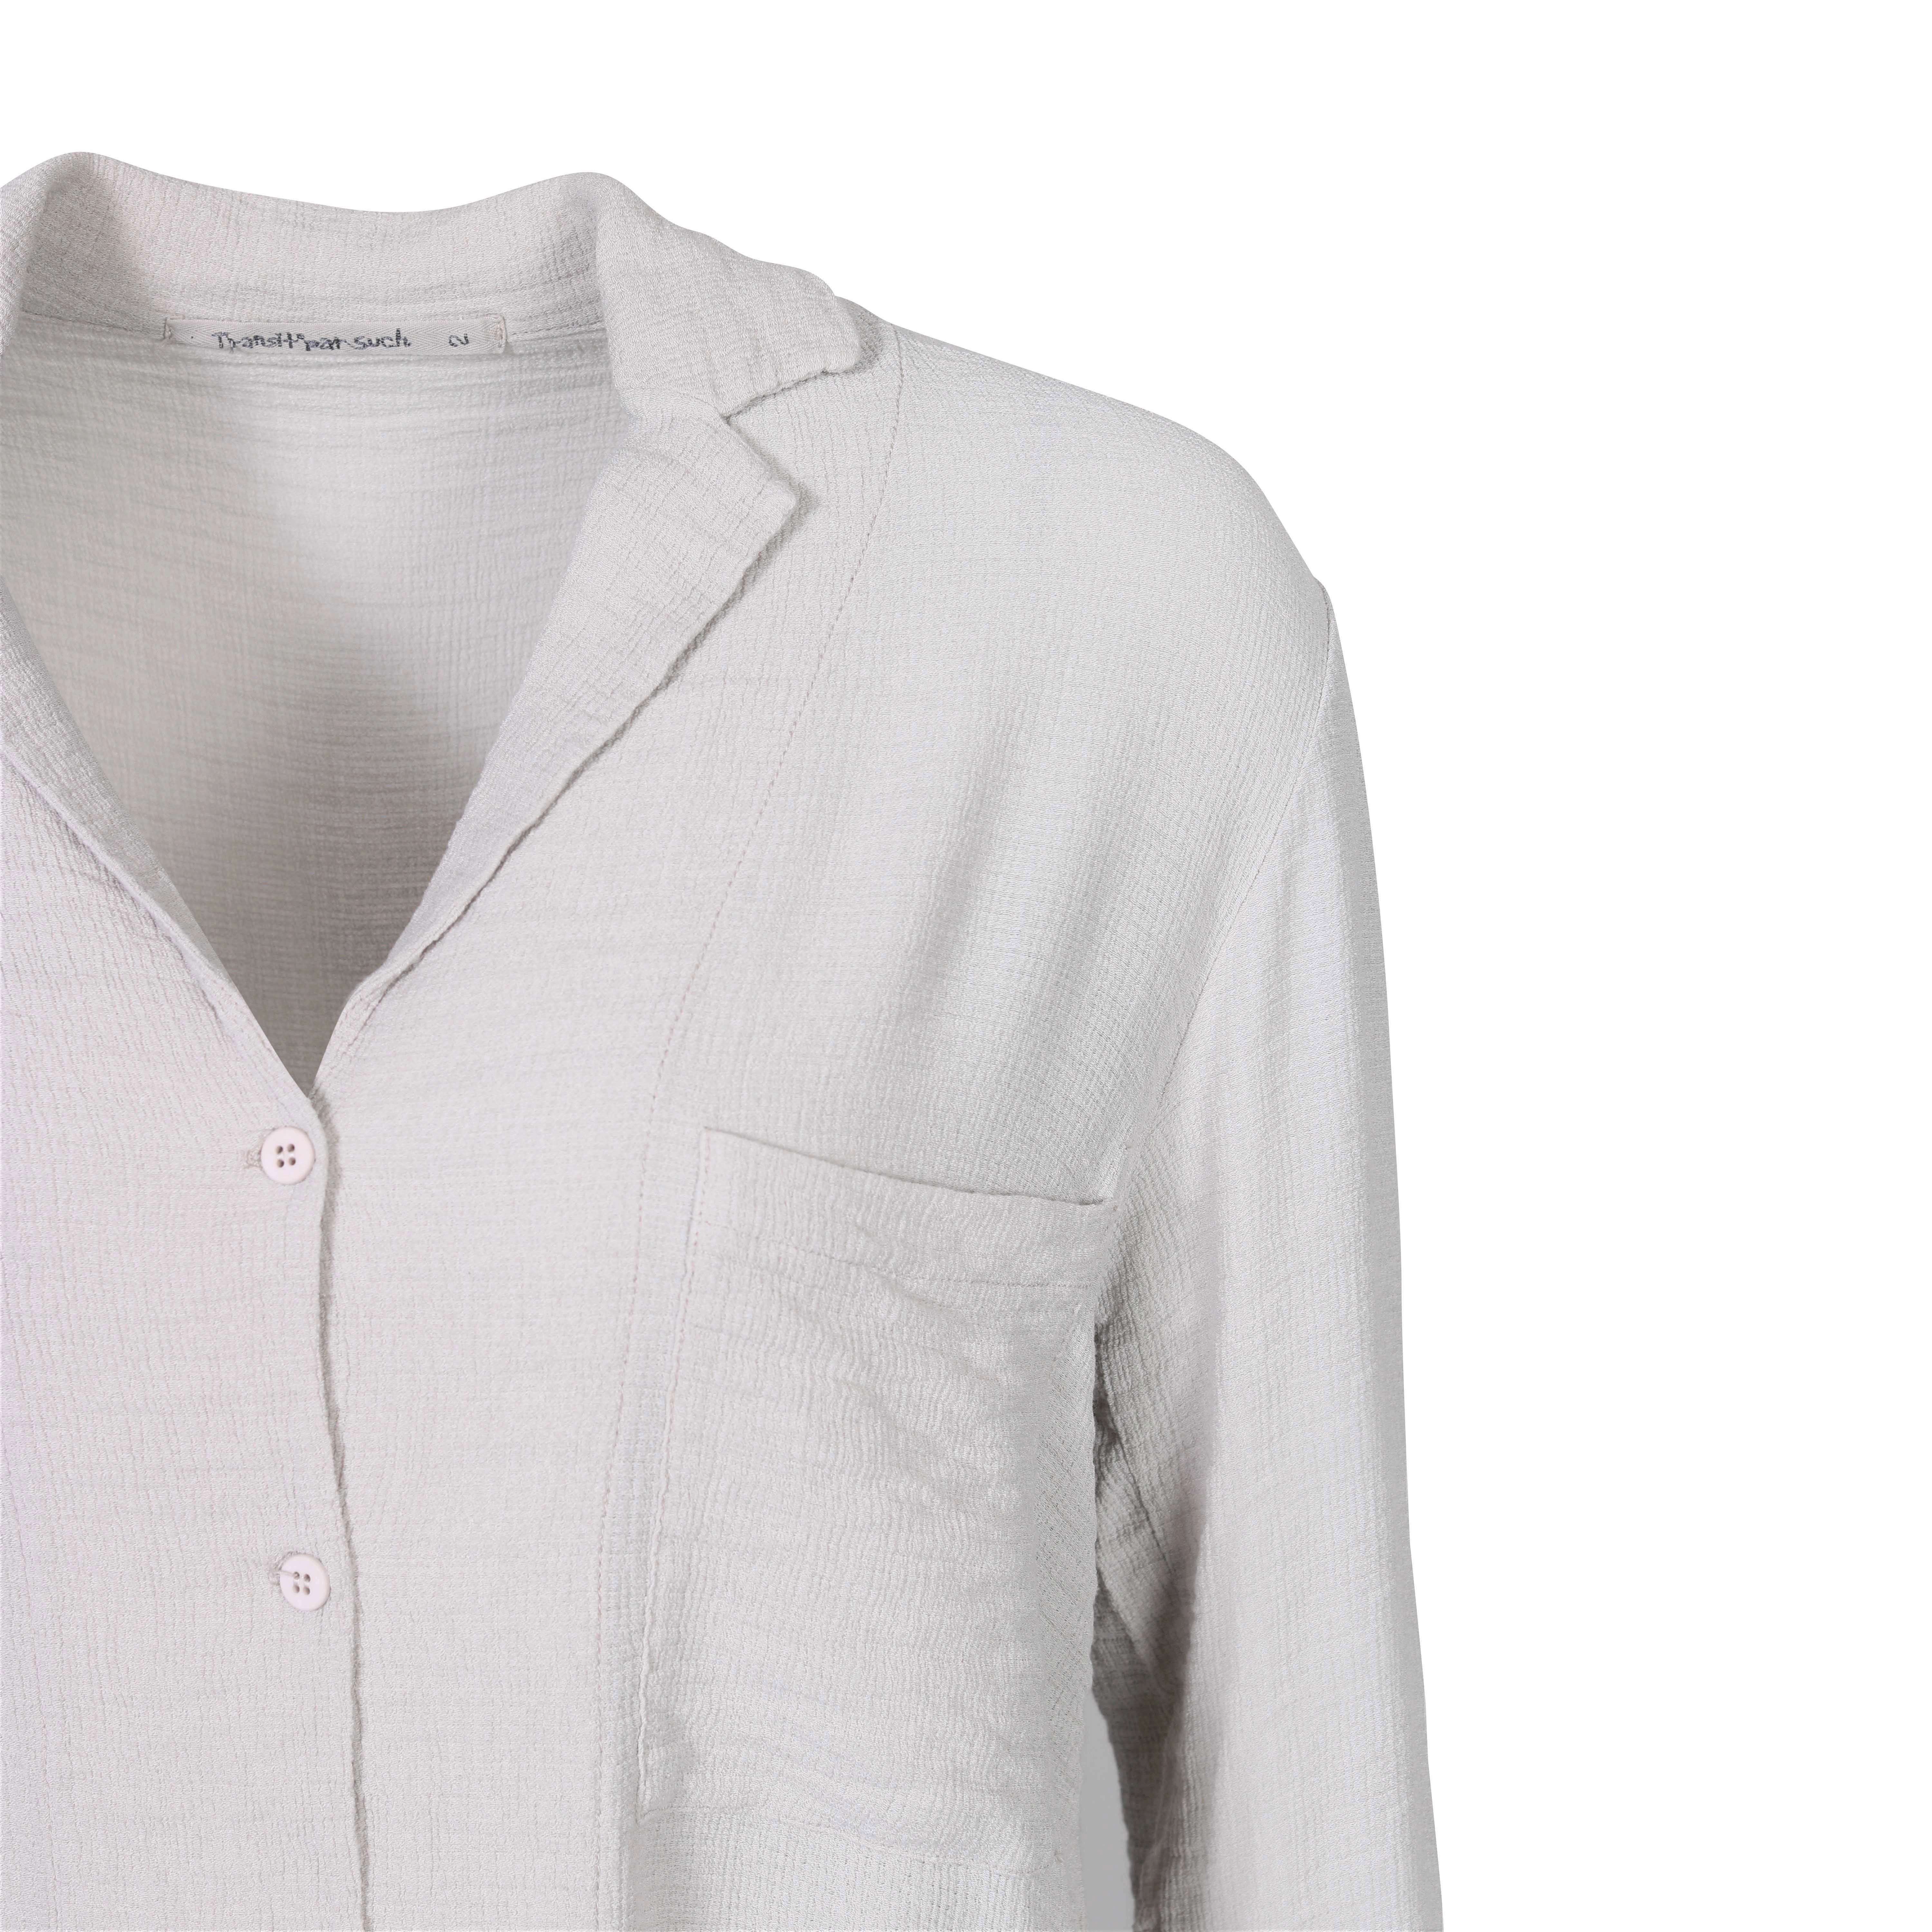 Transit Par Such Camicia Blouse in Light Grey